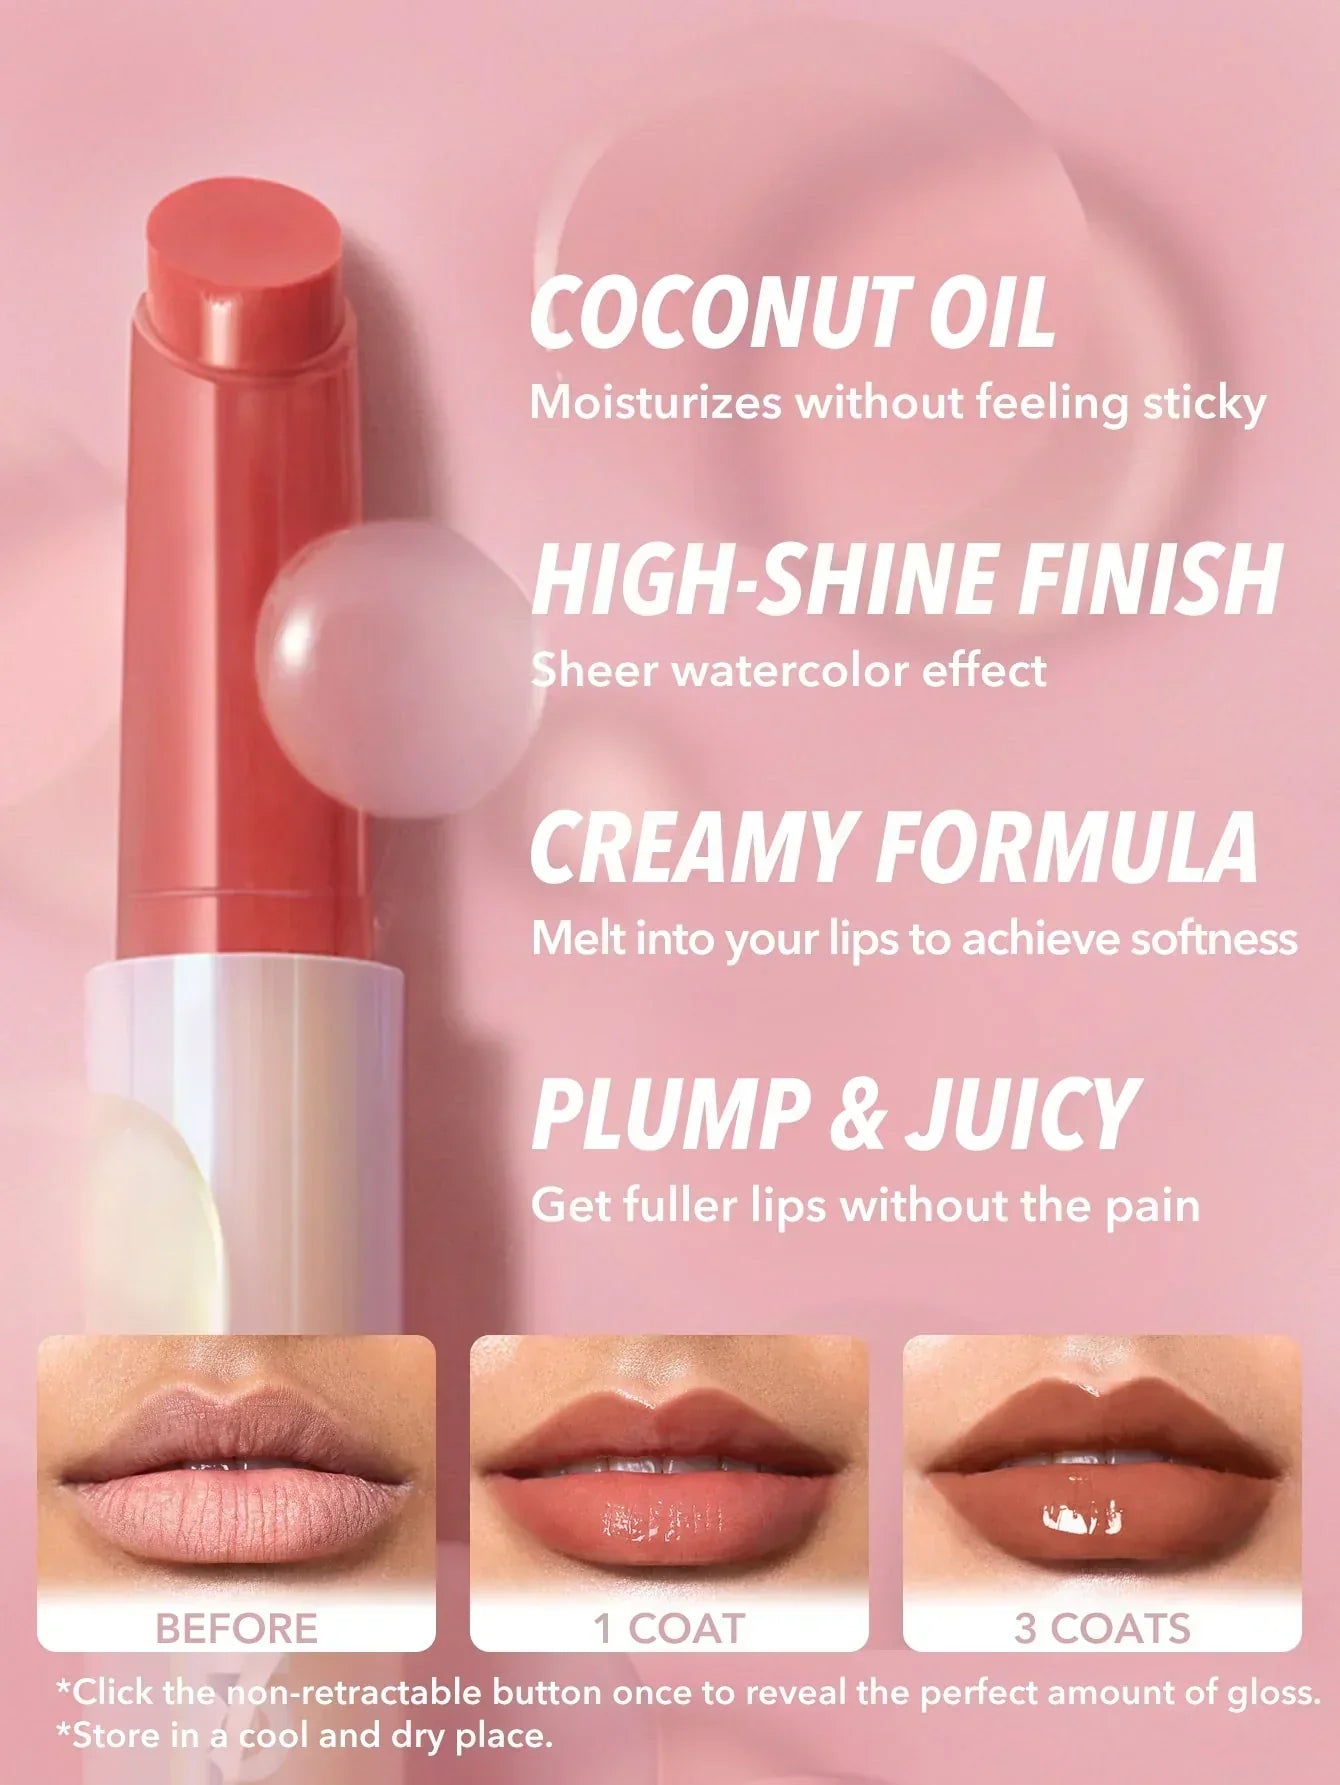 SheGlam Pout-Perfect Shine Lip Plumper | In Bloom